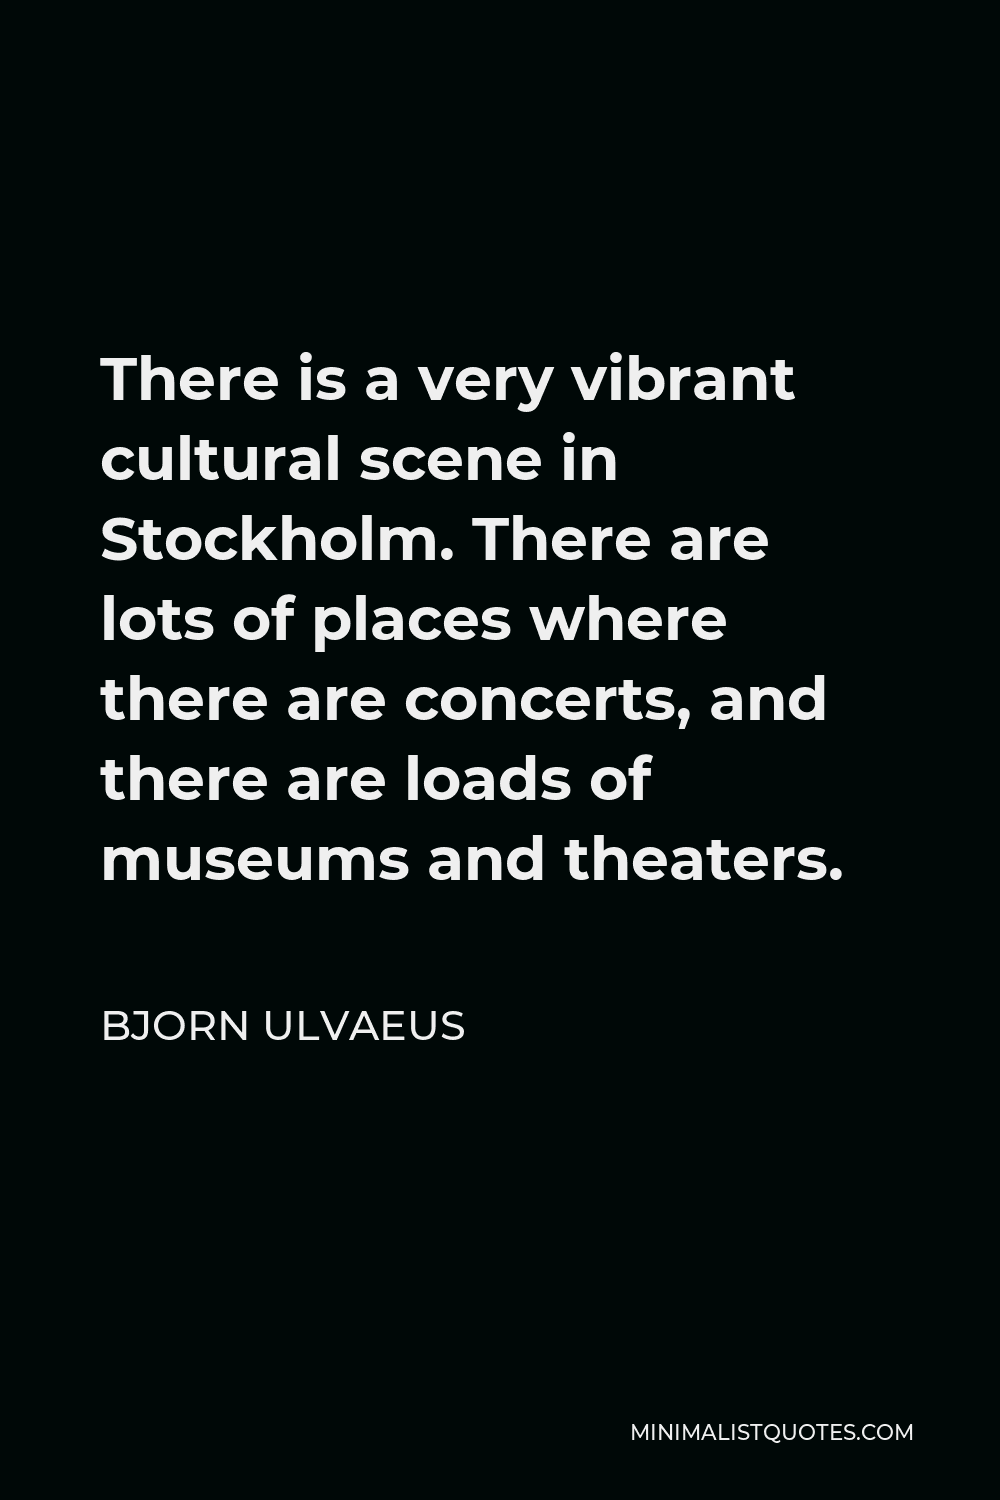 Bjorn Ulvaeus Quote - There is a very vibrant cultural scene in Stockholm. There are lots of places where there are concerts, and there are loads of museums and theaters.